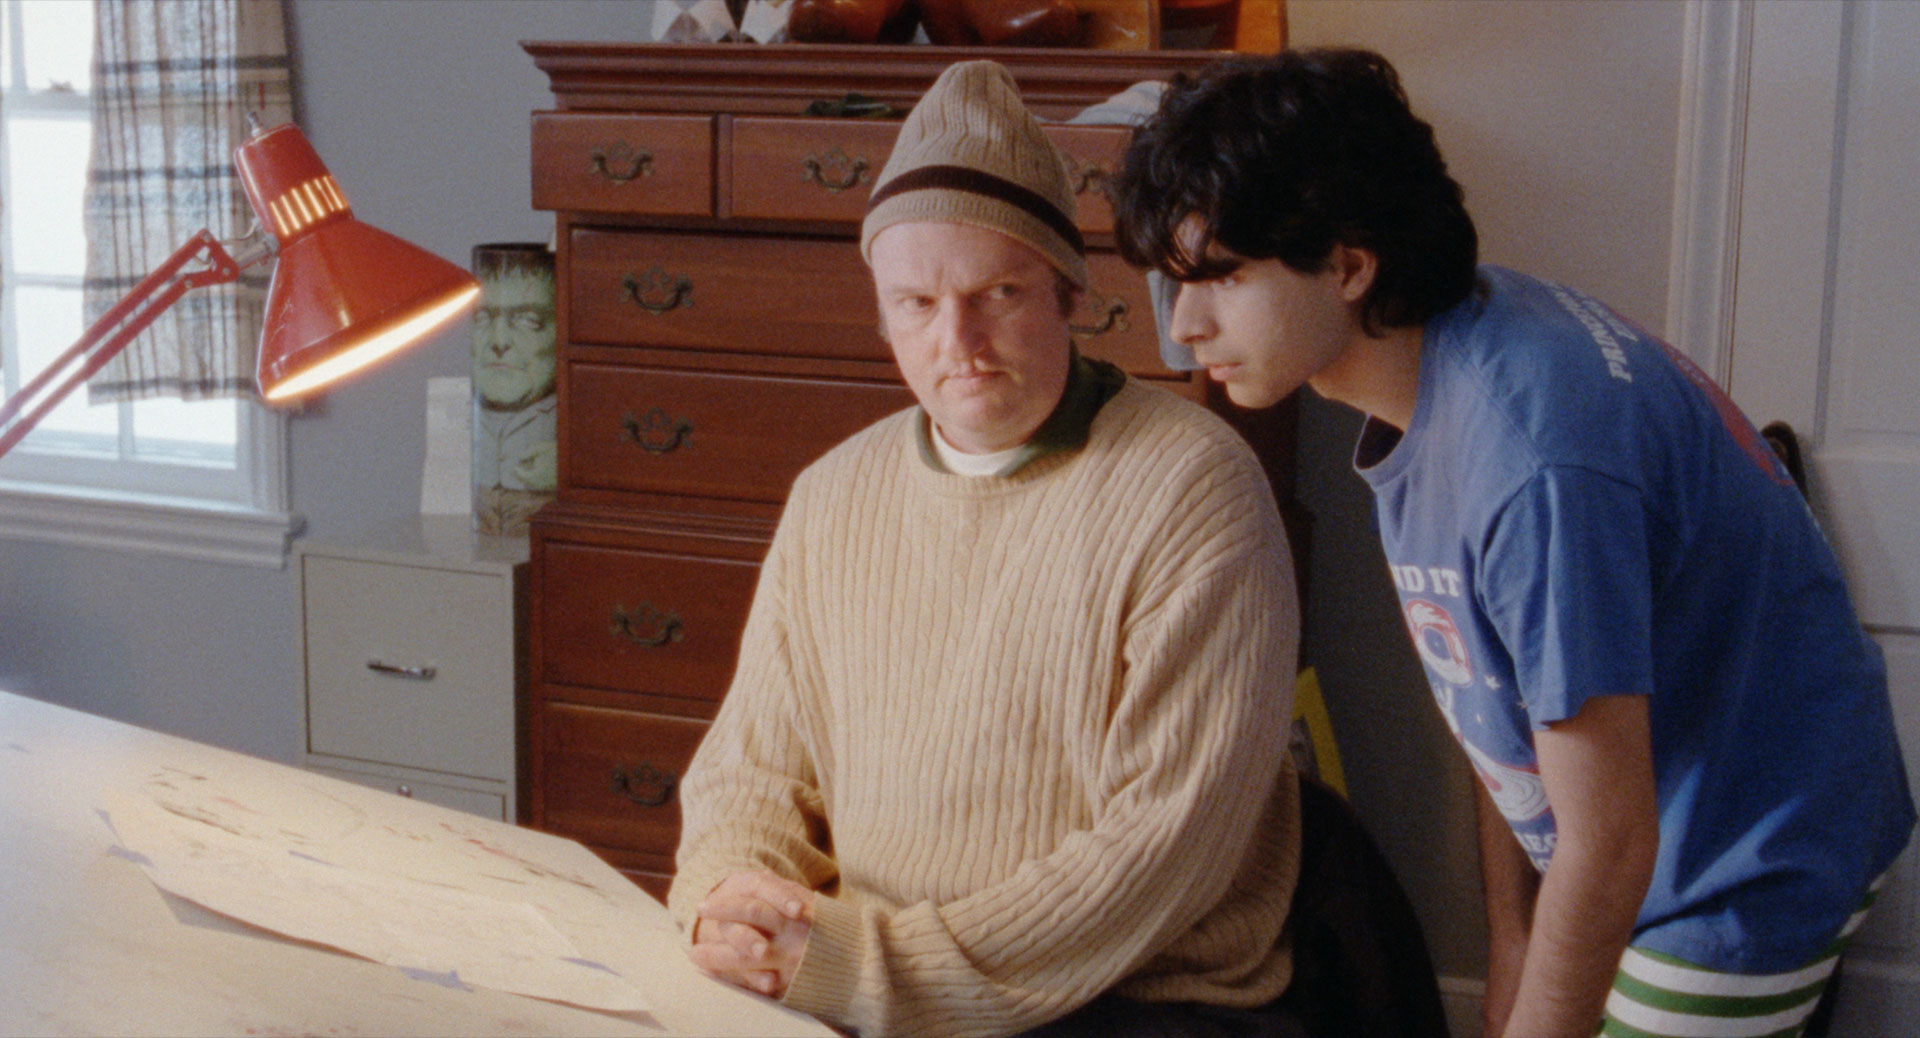 Still from FUNNY PAGES showing Matthew Maher and Daniel Zolghadri